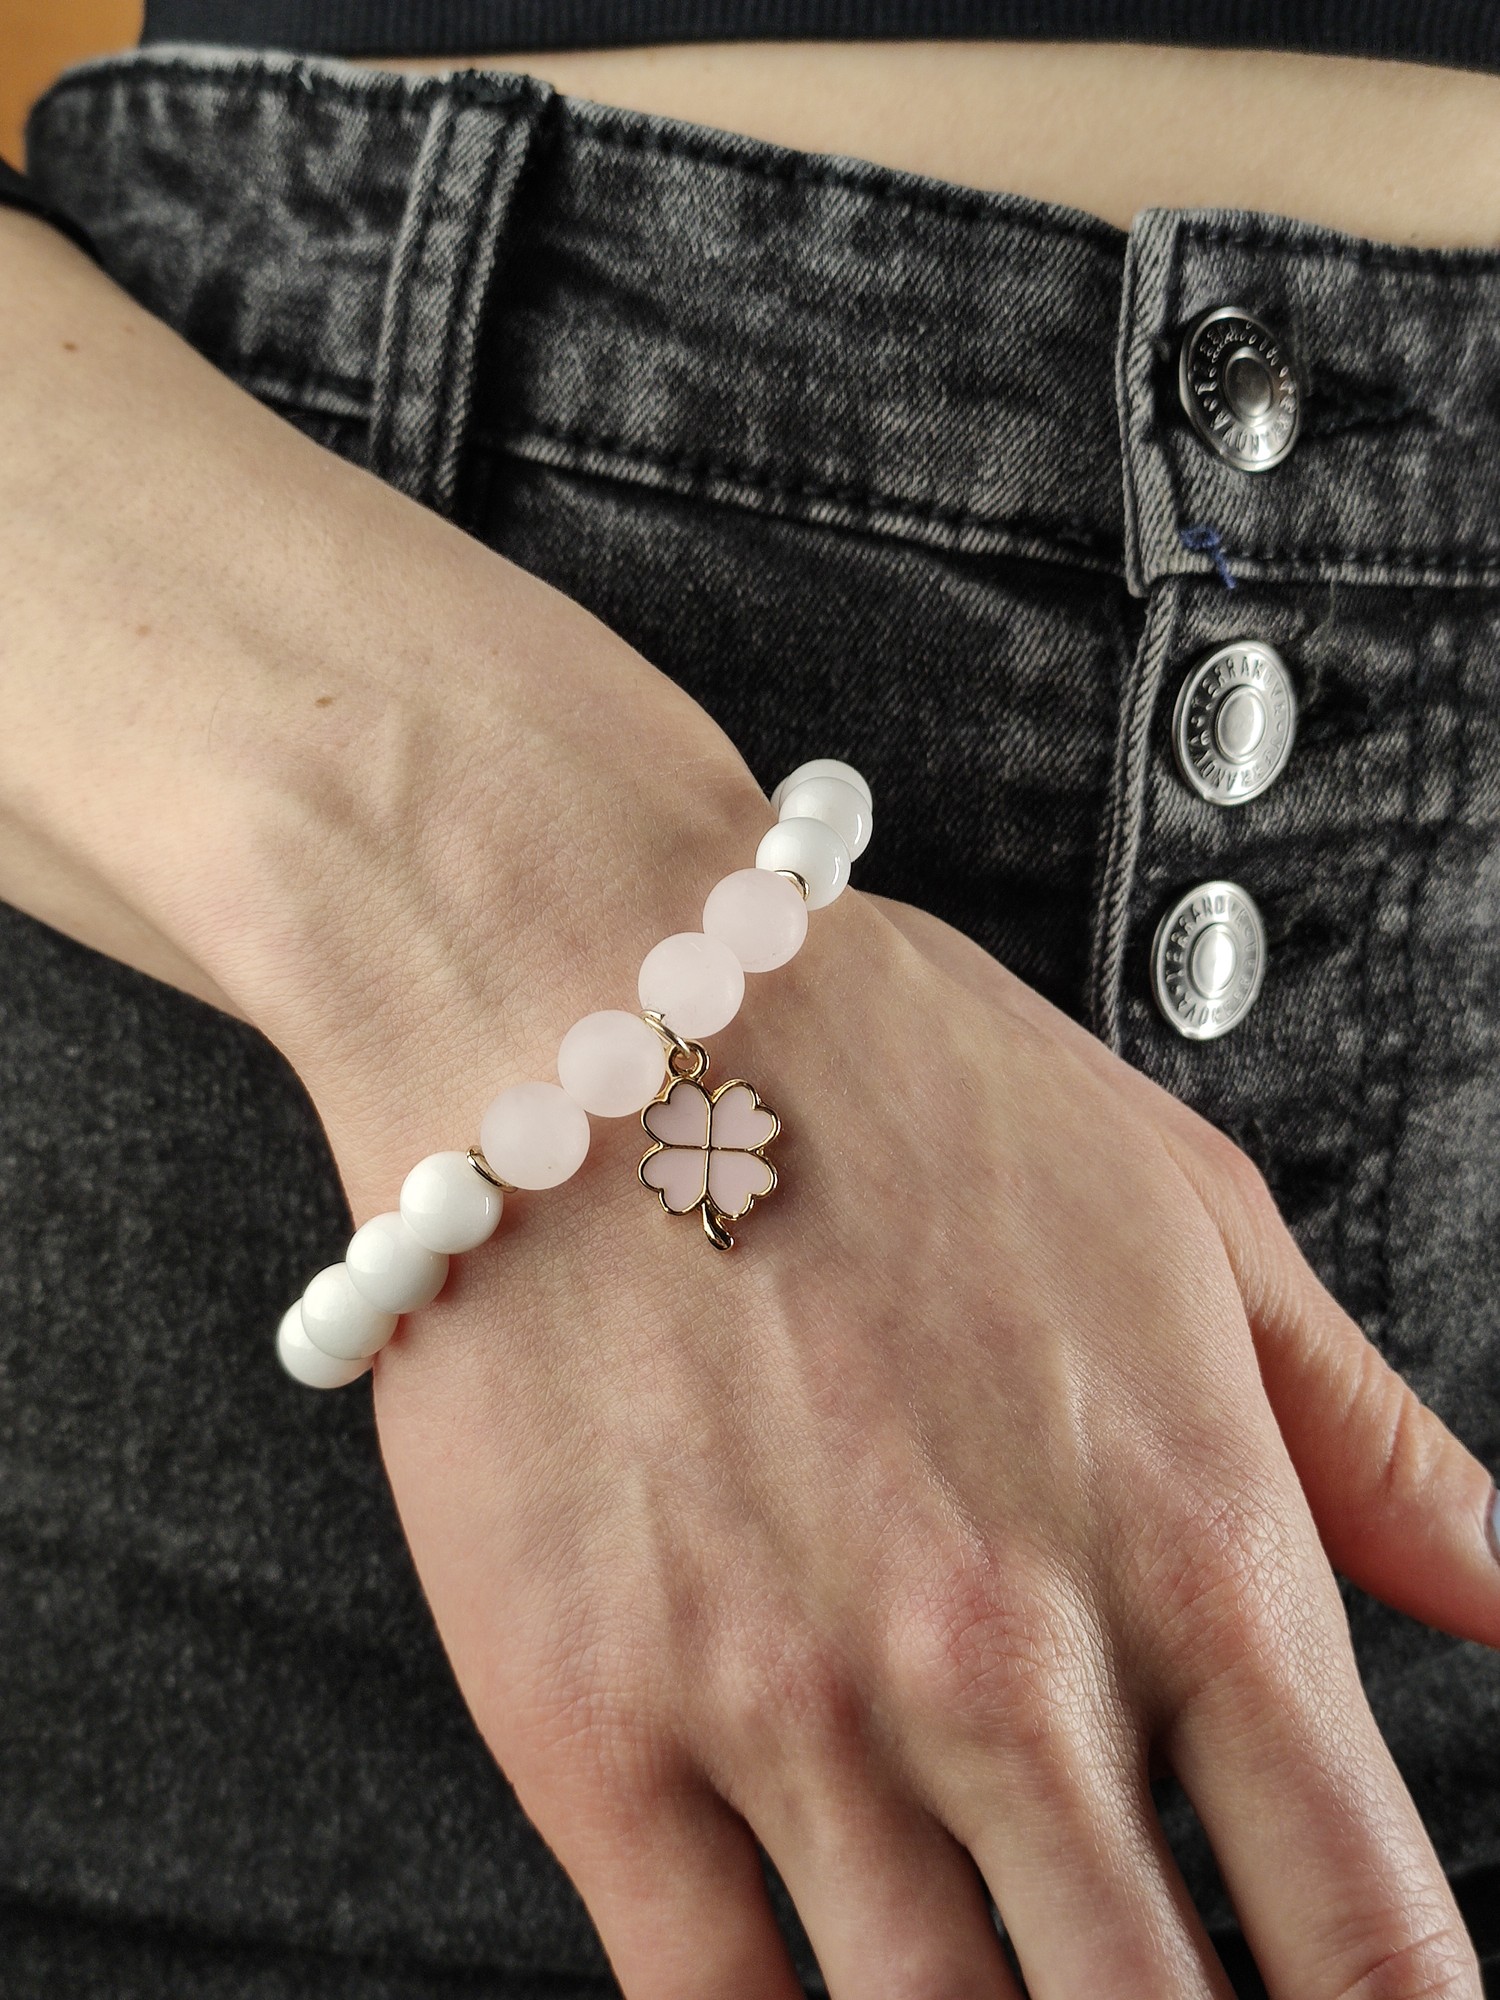 Bracelet with natural stones and Clover pendant